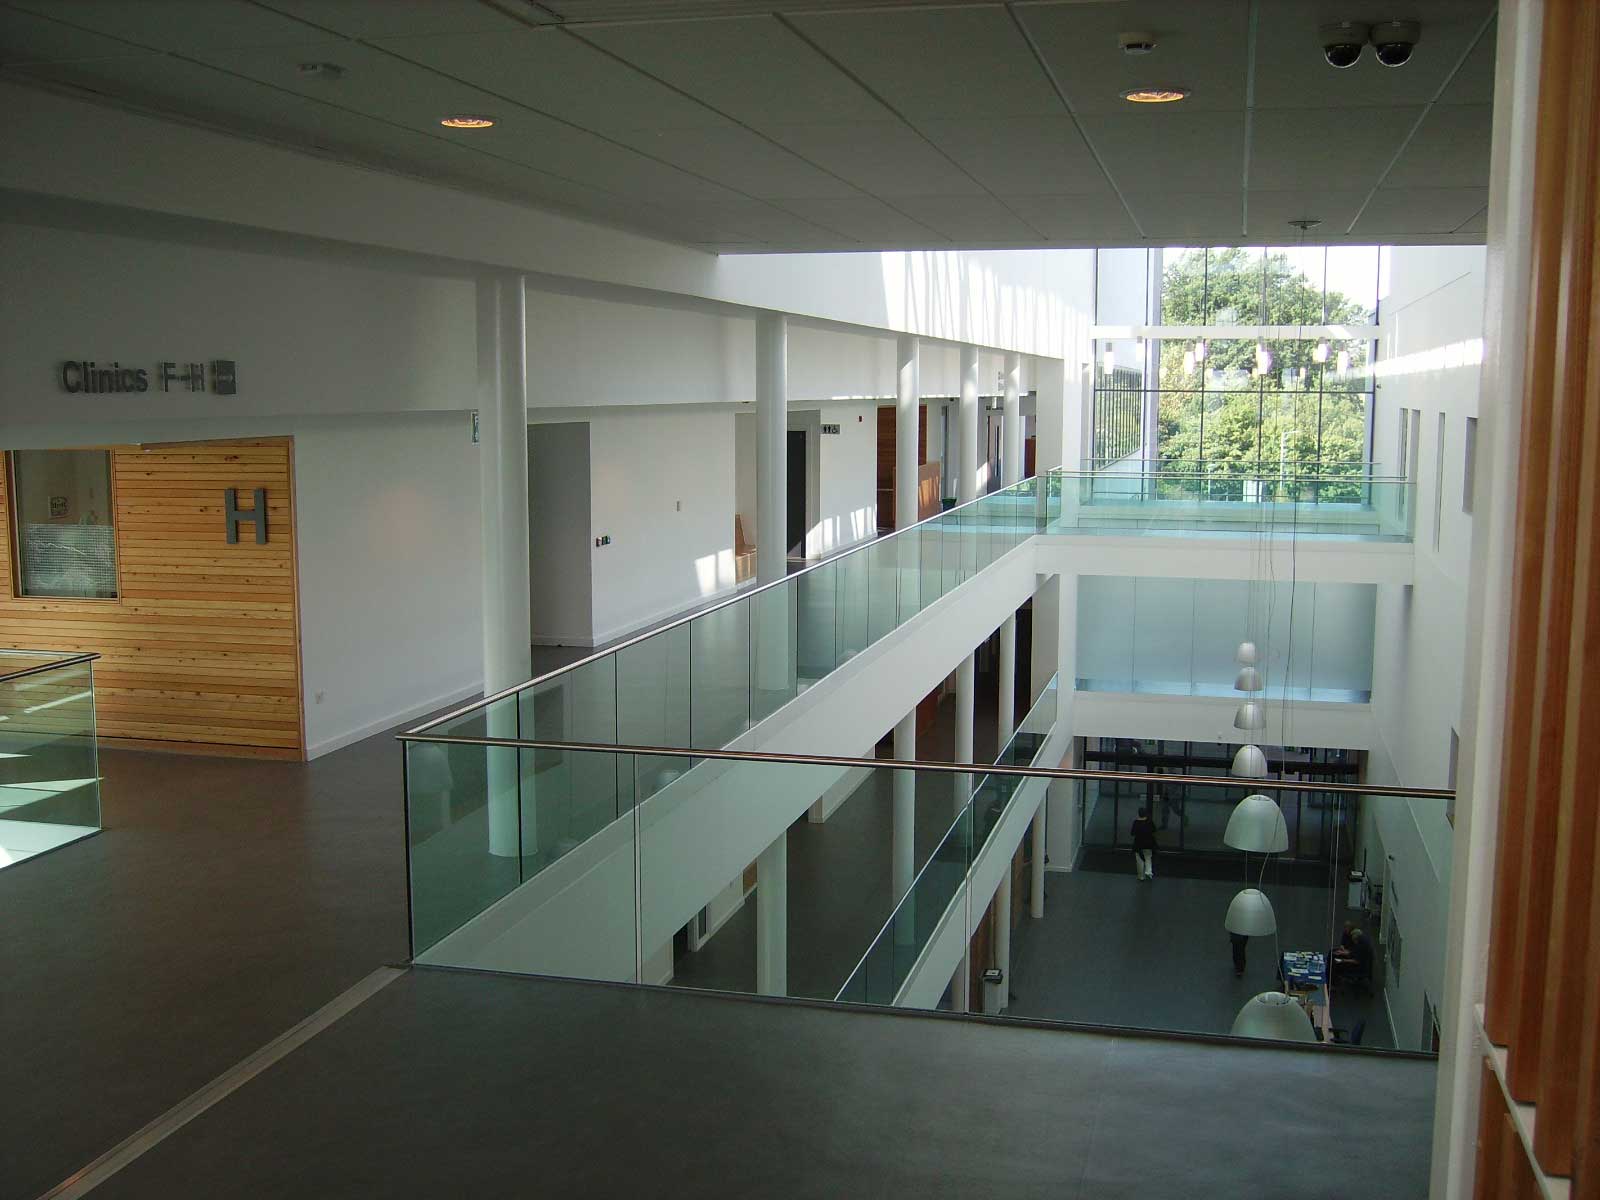 A view across the atrium of a hospital - you can see doors into individual offices over two floors and a large expanse of windows at the back looking out towards trees and greenery 